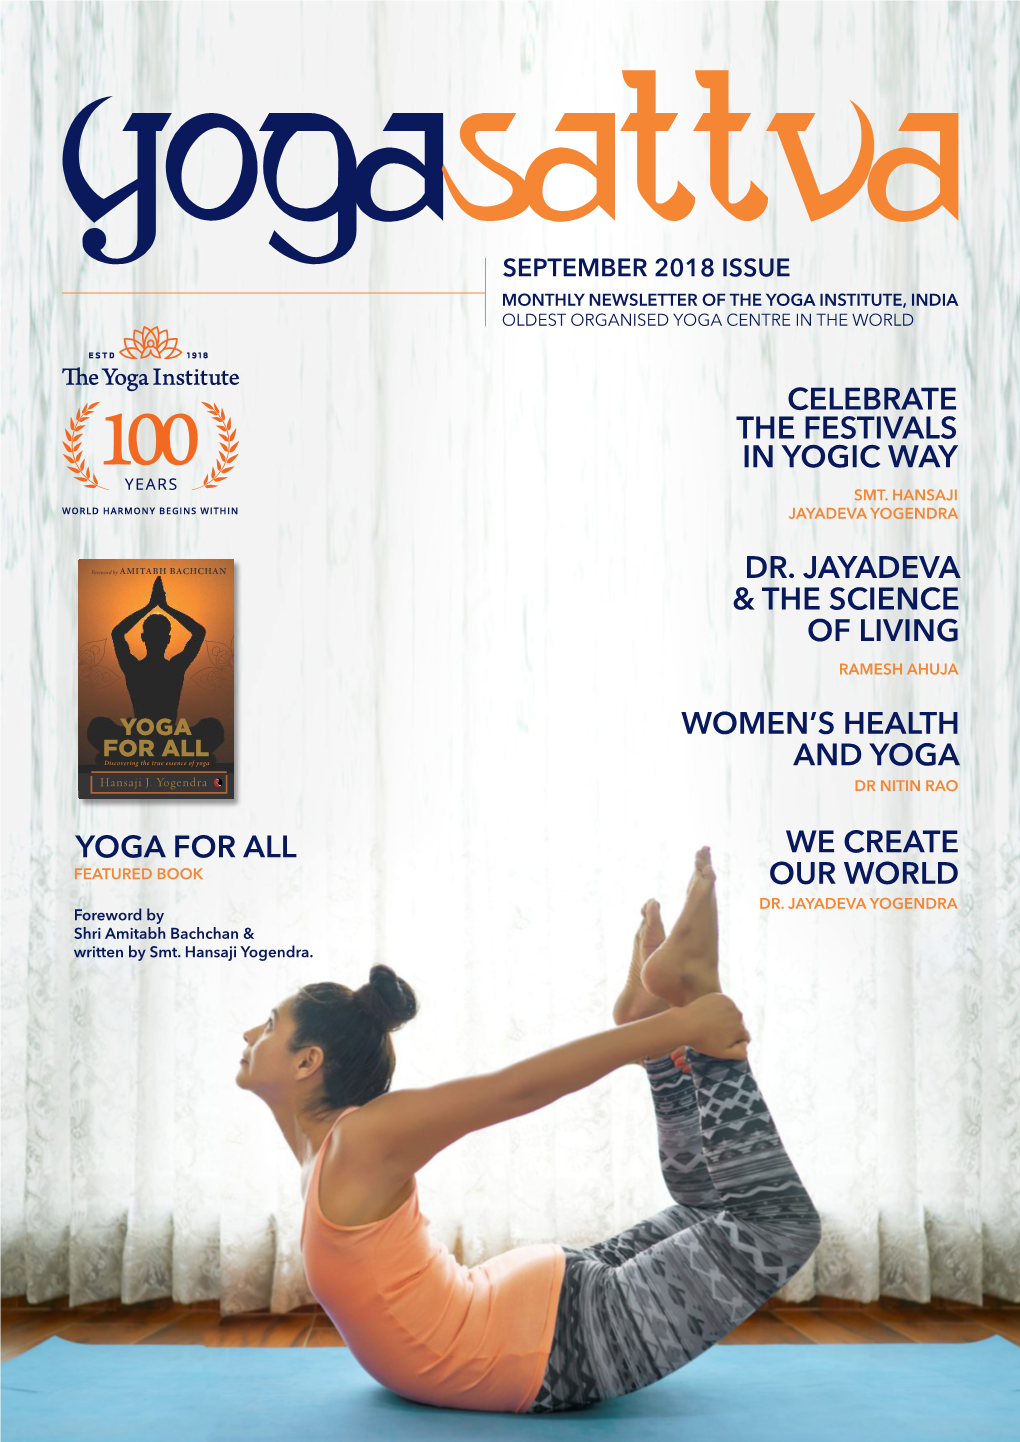 Celebrate the Festivals in Yogic Way Women's Health and Yoga We Create Our World Yoga for All Dr. Jayadeva & the Science